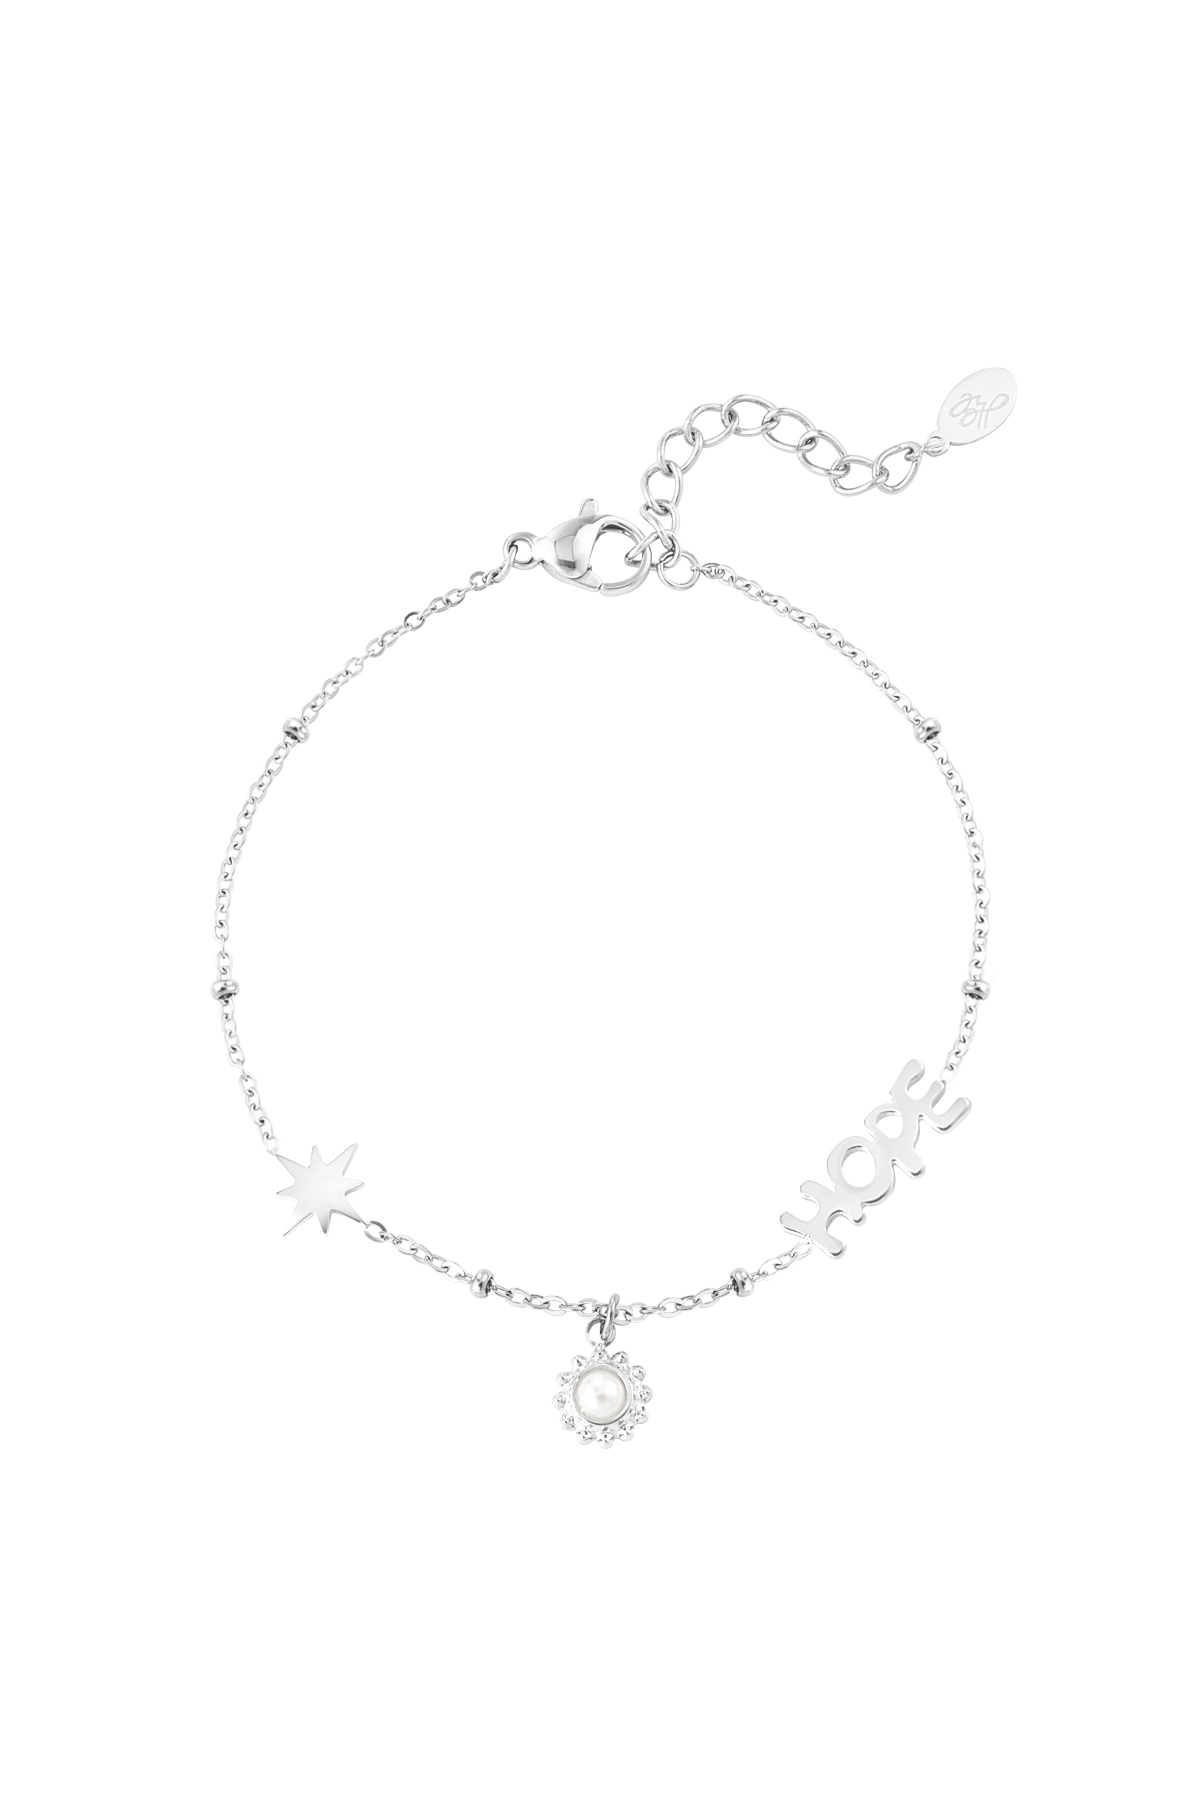 ball bracelet with hope and pendants - silver h5 